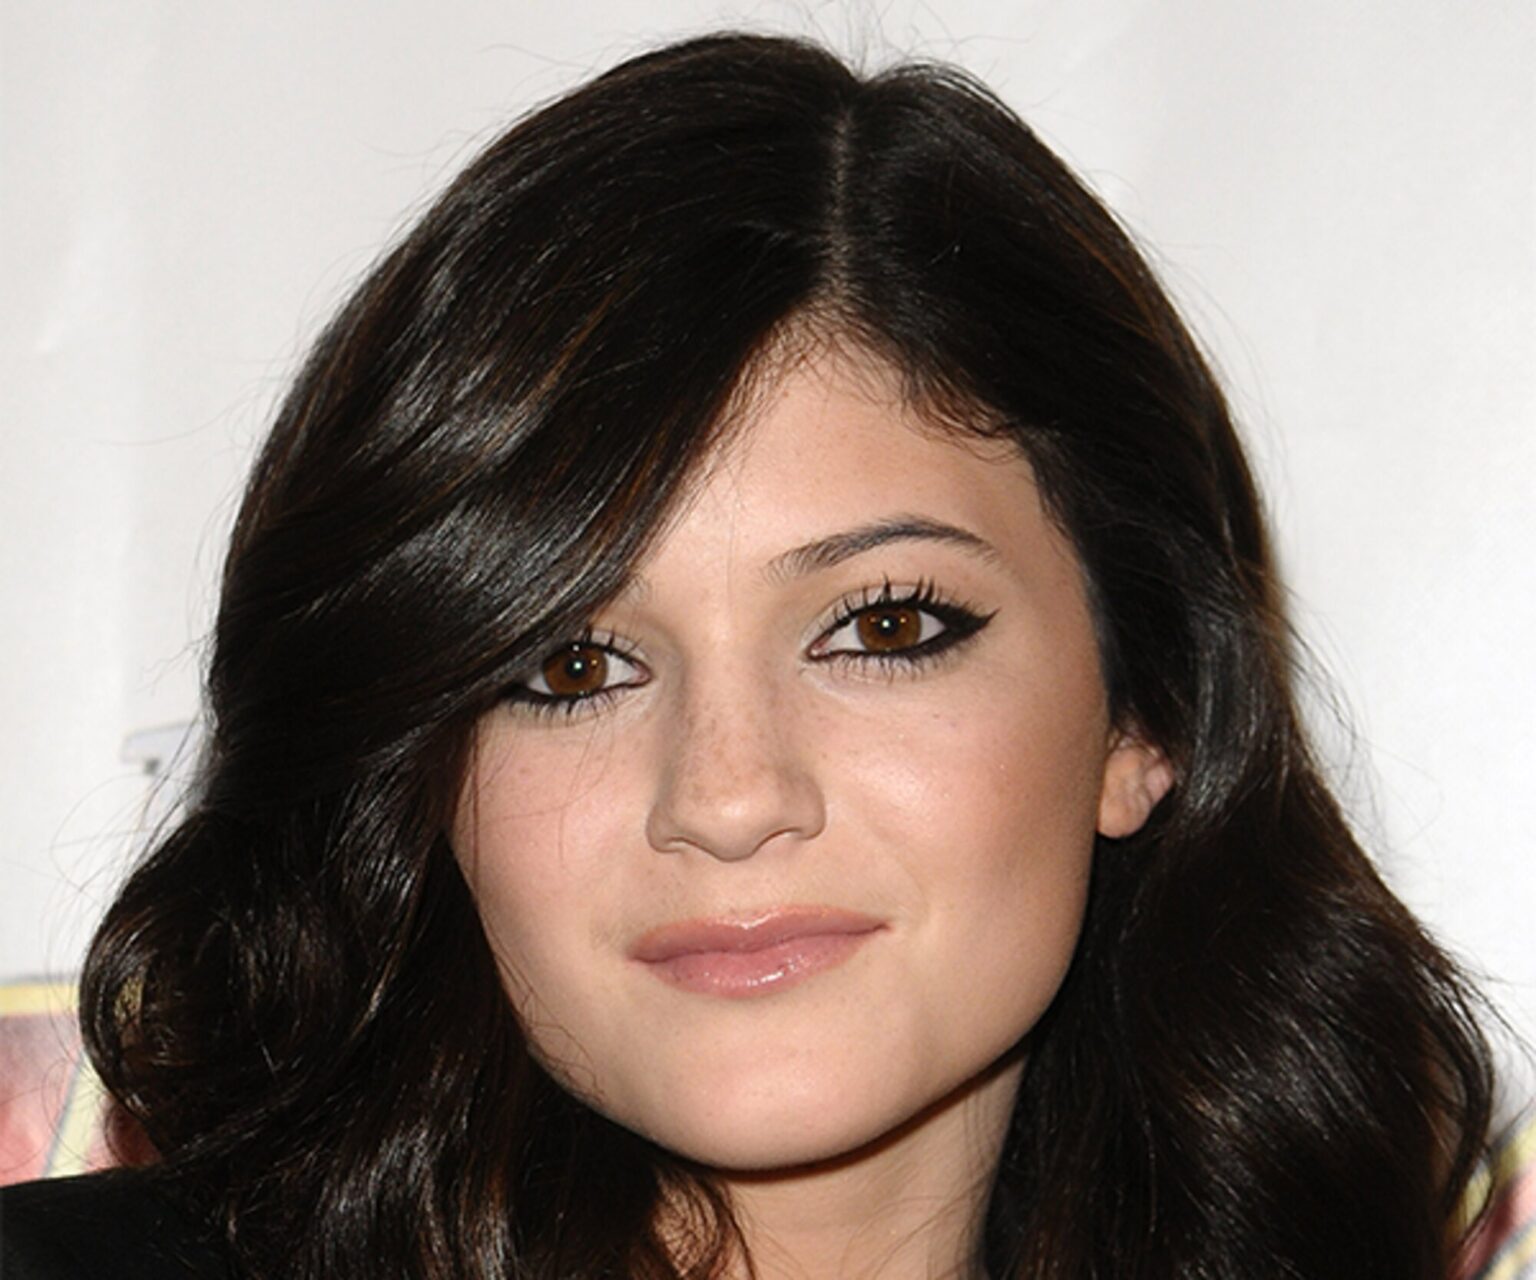 Does anyone remember what Kylie Jenner looked like back when she was younger? Let’s take a look at the throwback video that’s trending all over the web.